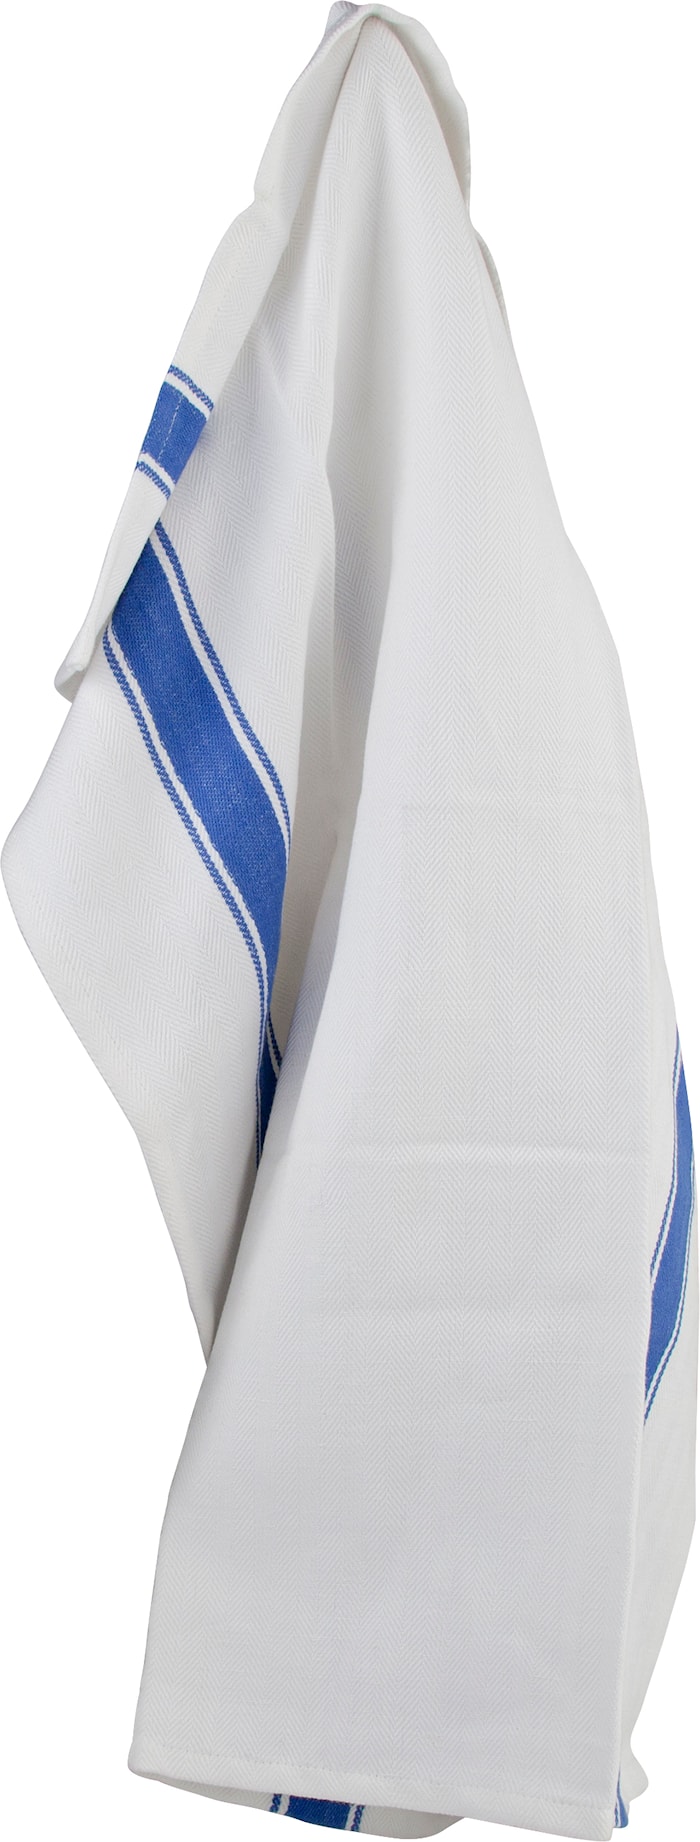 Kitchen Towel with Blue Stripes